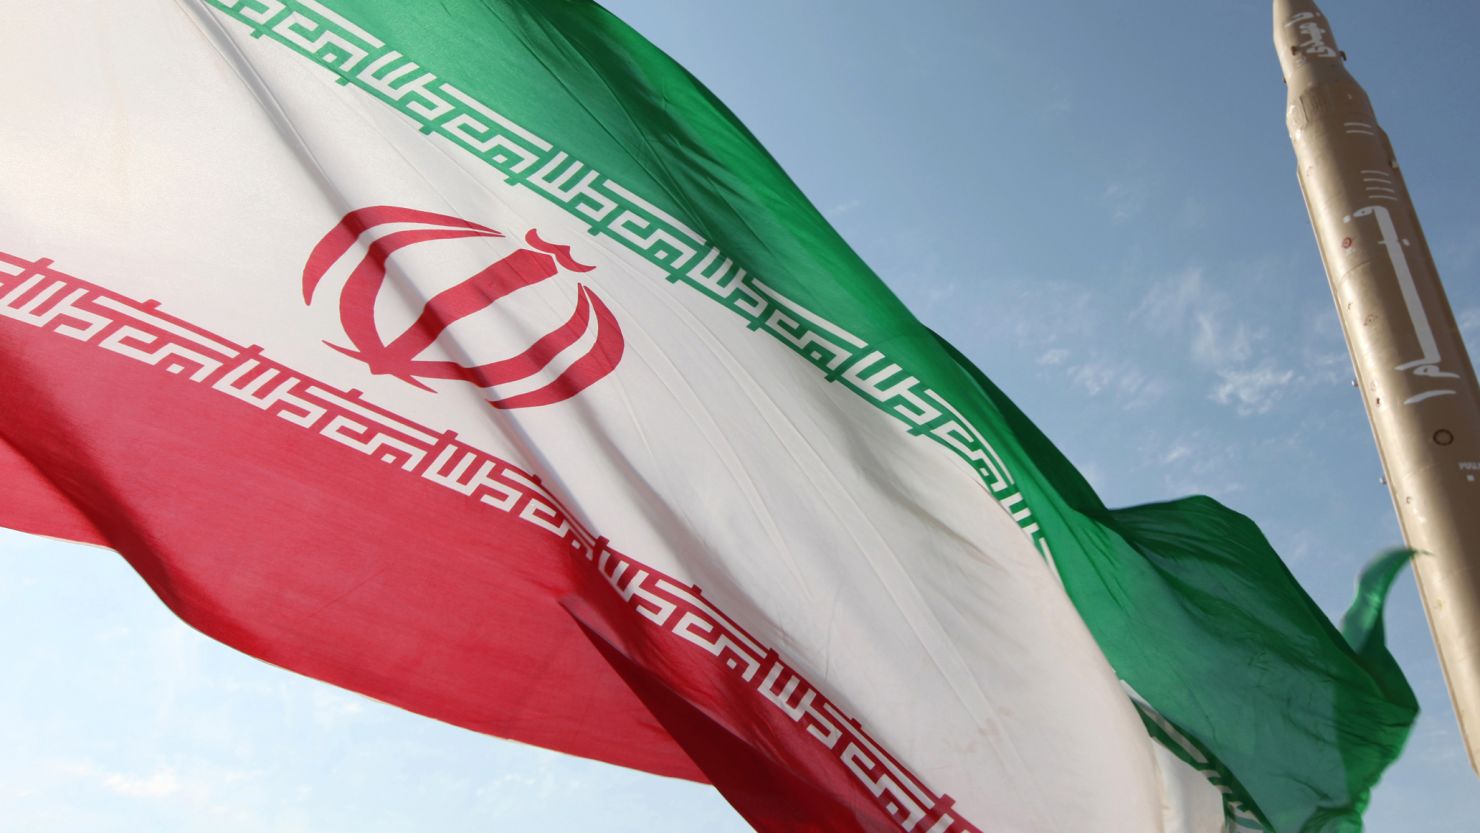 The interim nuclear deal between Iran and the U.S. may be in jeopardy if new sanctions take effect, two leading scholars say.